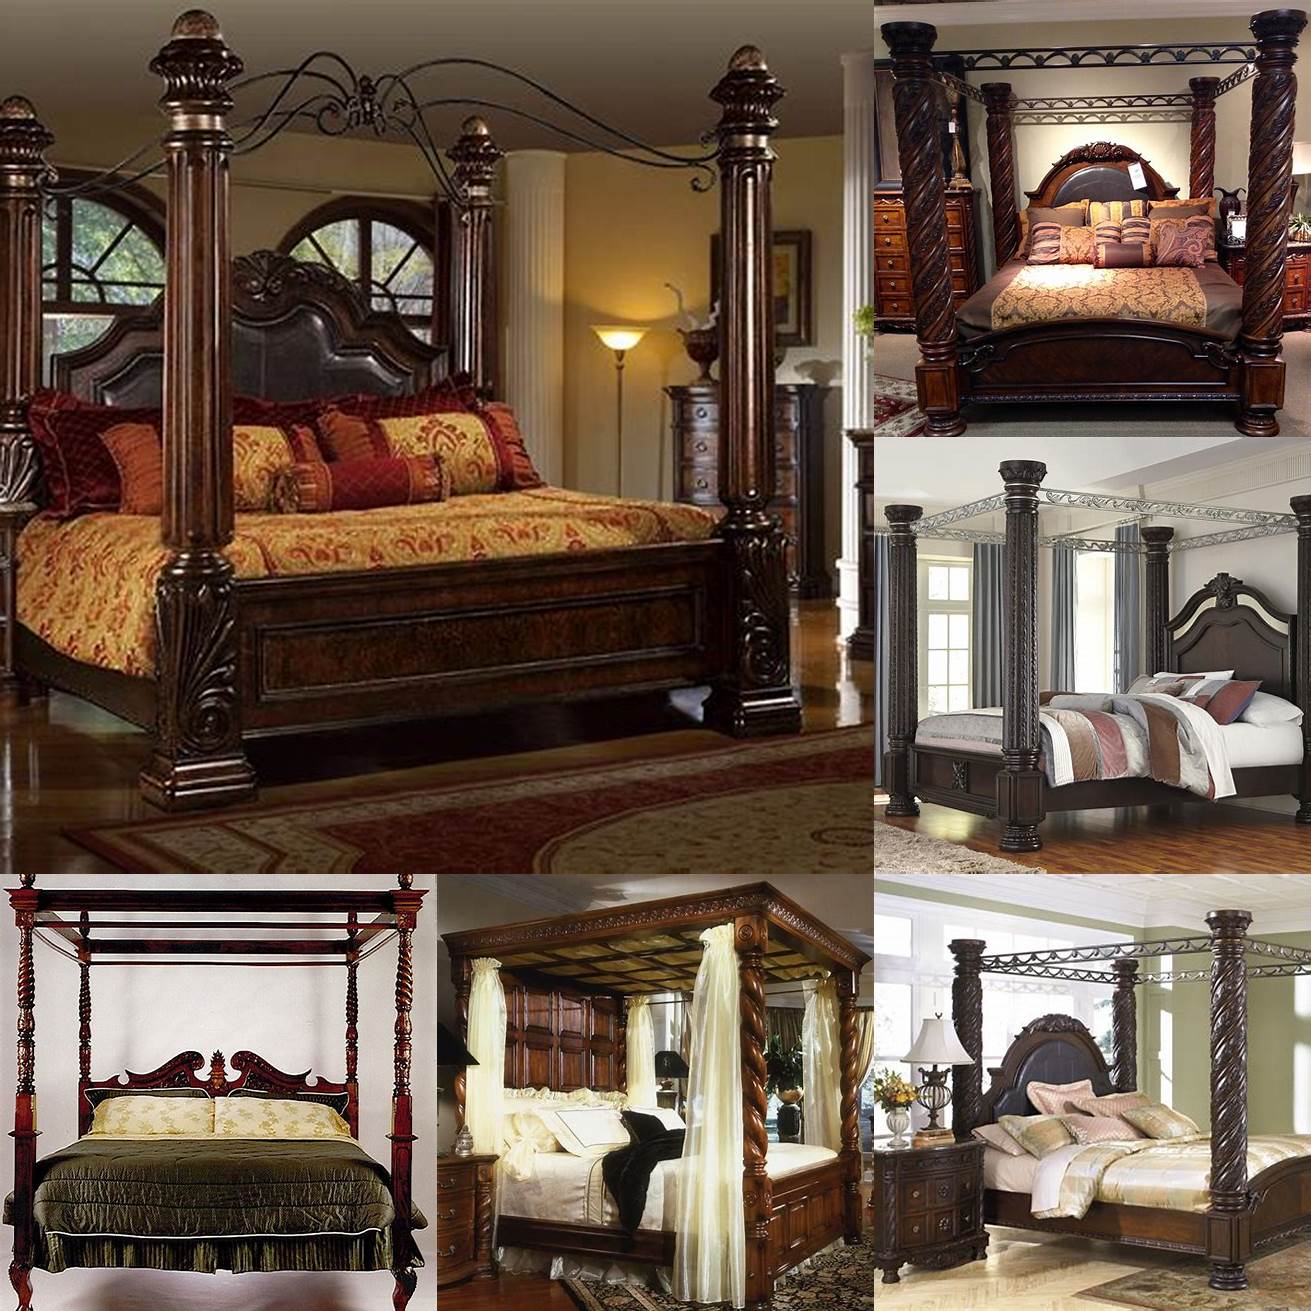 Canopy California King Bed This type of bed has a four-poster design and is perfect for people who want a luxurious look in their bedroom It is also ideal for people who want more privacy when sleeping